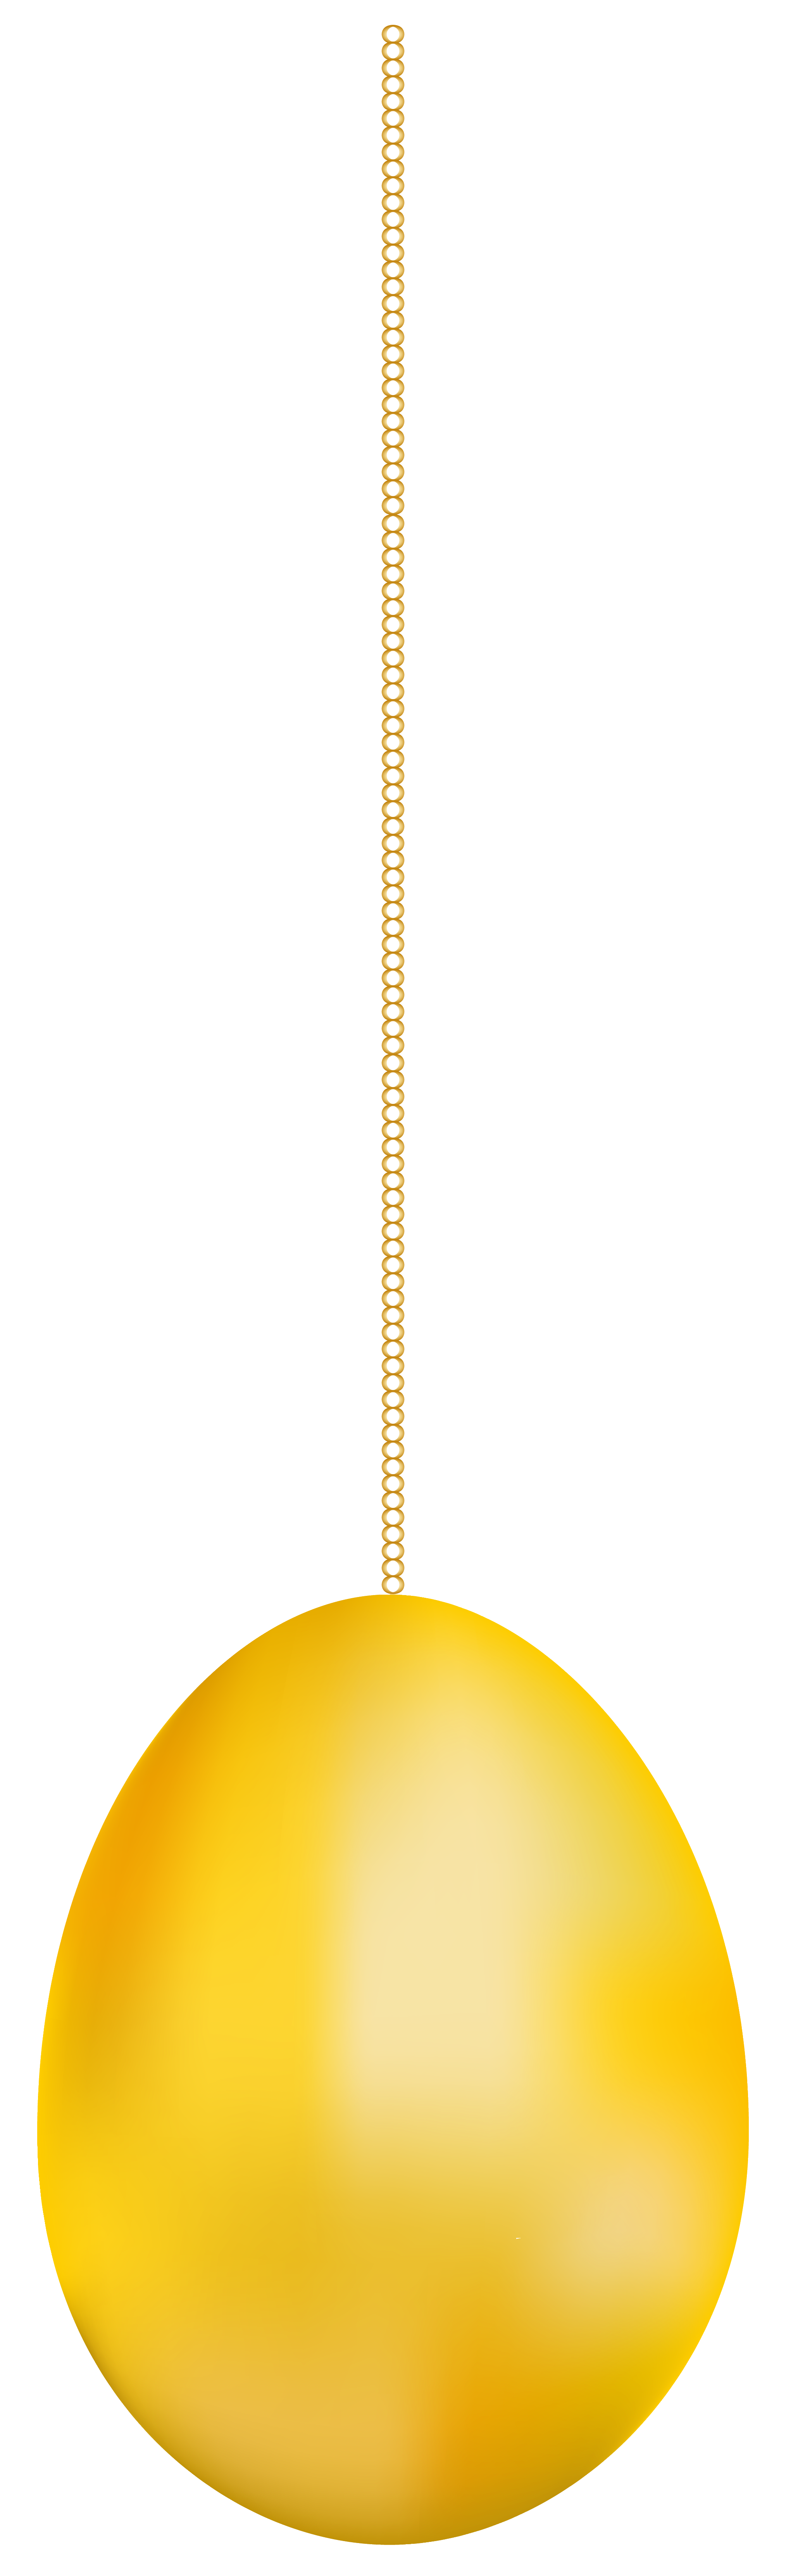 Gold Easter Yellow Hanging Egg Transparent Clipart